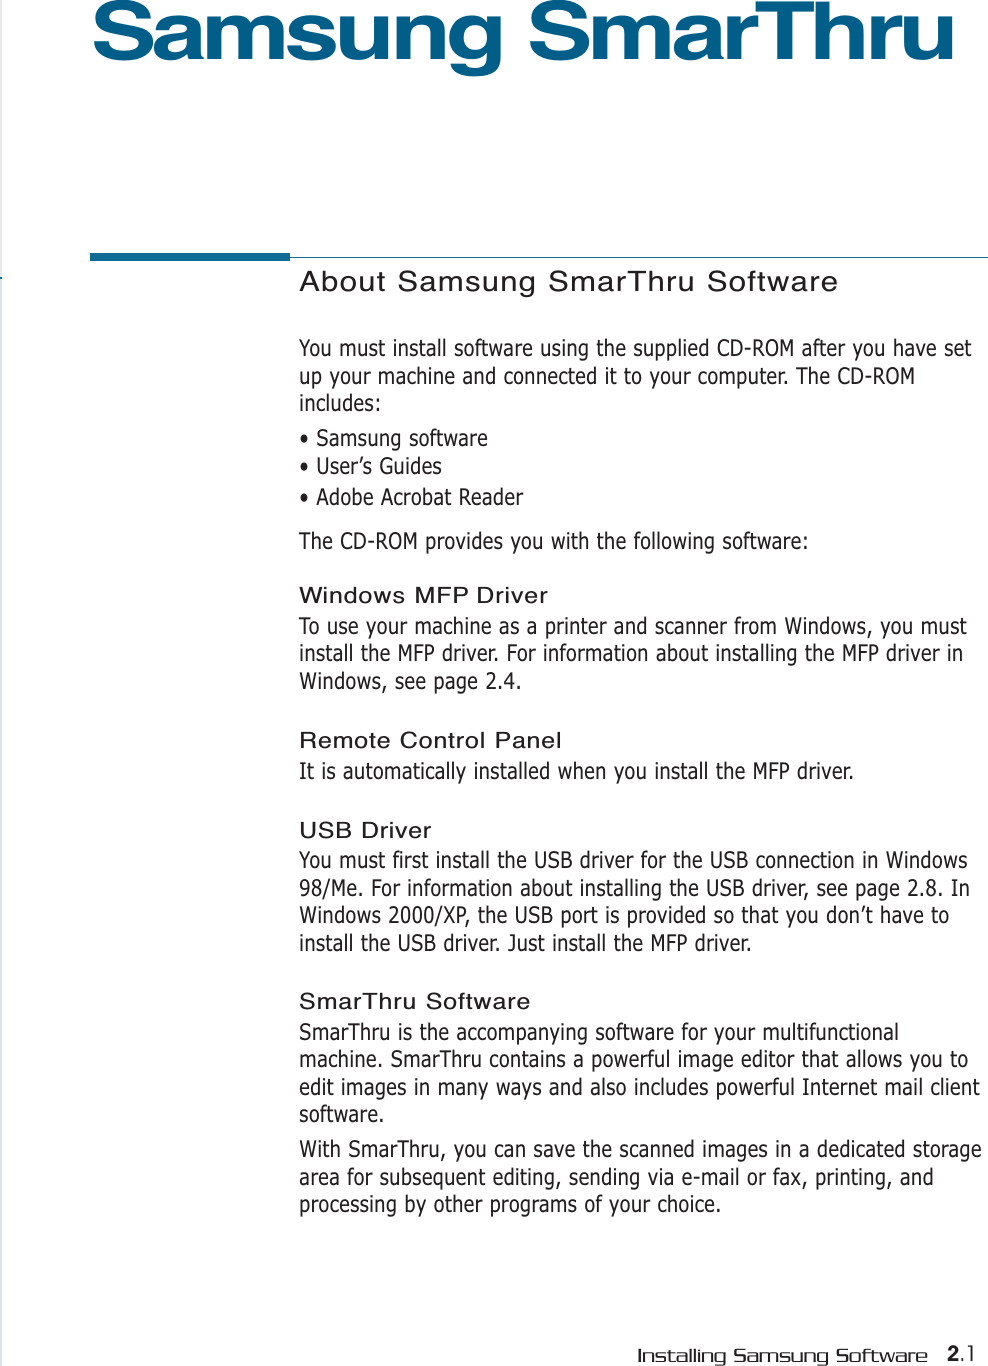 2.1Installing Samsung SoftwareAbout Samsung SmarThru SoftwareYou must install software using the supplied CD-ROM after you have setup your machine and connected it to your computer. The CD-ROMincludes:• Samsung software• User’s Guides• Adobe Acrobat ReaderThe CD-ROM provides you with the following software:Windows MFP Driver To use your machine as a printer and scanner from Windows, you mustinstall the MFP driver. For information about installing the MFP driver inWindows, see page 2.4.Remote Control PanelIt is automatically installed when you install the MFP driver. USB Driver You must first install the USB driver for the USB connection in Windows98/Me. For information about installing the USB driver, see page 2.8. InWindows 2000/XP, the USB port is provided so that you don’t have toinstall the USB driver. Just install the MFP driver.SmarThru SoftwareSmarThru is the accompanying software for your multifunctionalmachine. SmarThru contains a powerful image editor that allows you toedit images in many ways and also includes powerful Internet mail clientsoftware. With SmarThru, you can save the scanned images in a dedicated storagearea for subsequent editing, sending via e-mail or fax, printing, andprocessing by other programs of your choice.Samsung SmarThru